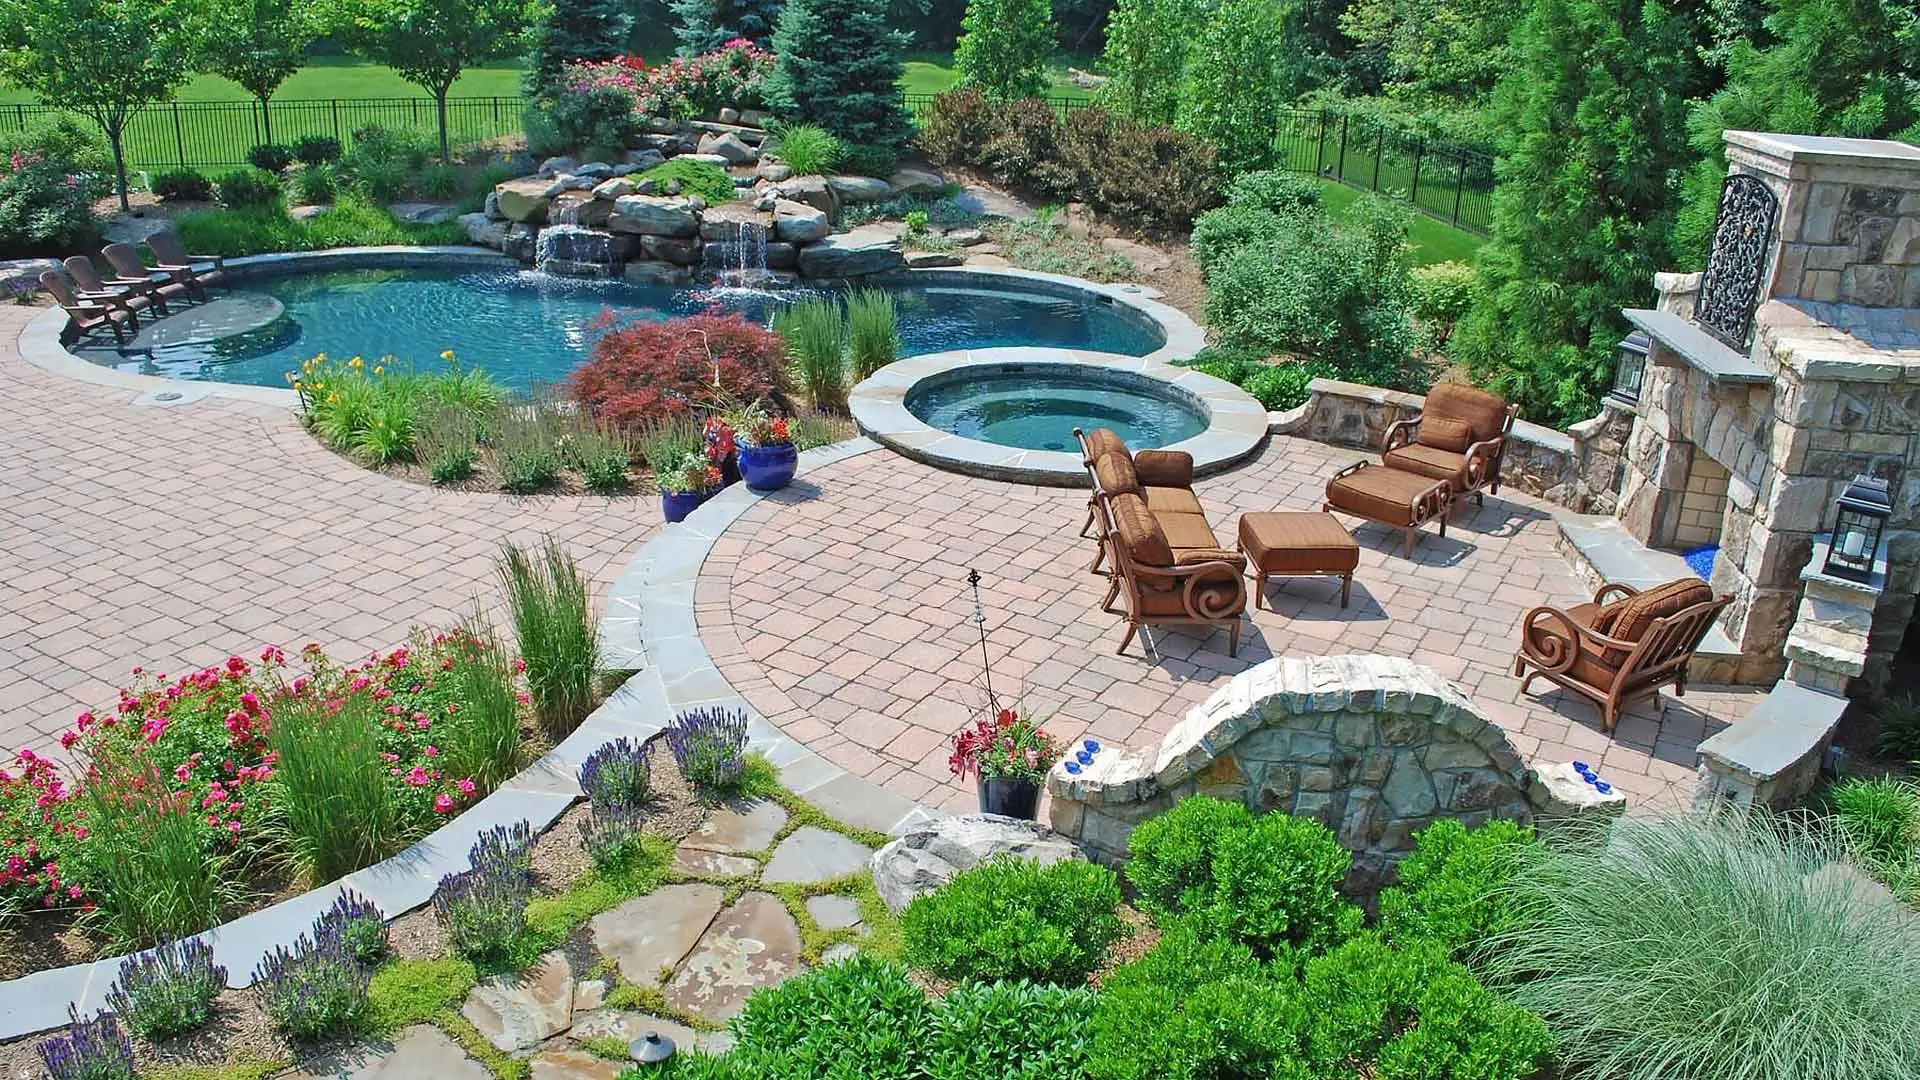 Beautiful outdoor living area and pool in West Chester, PA.